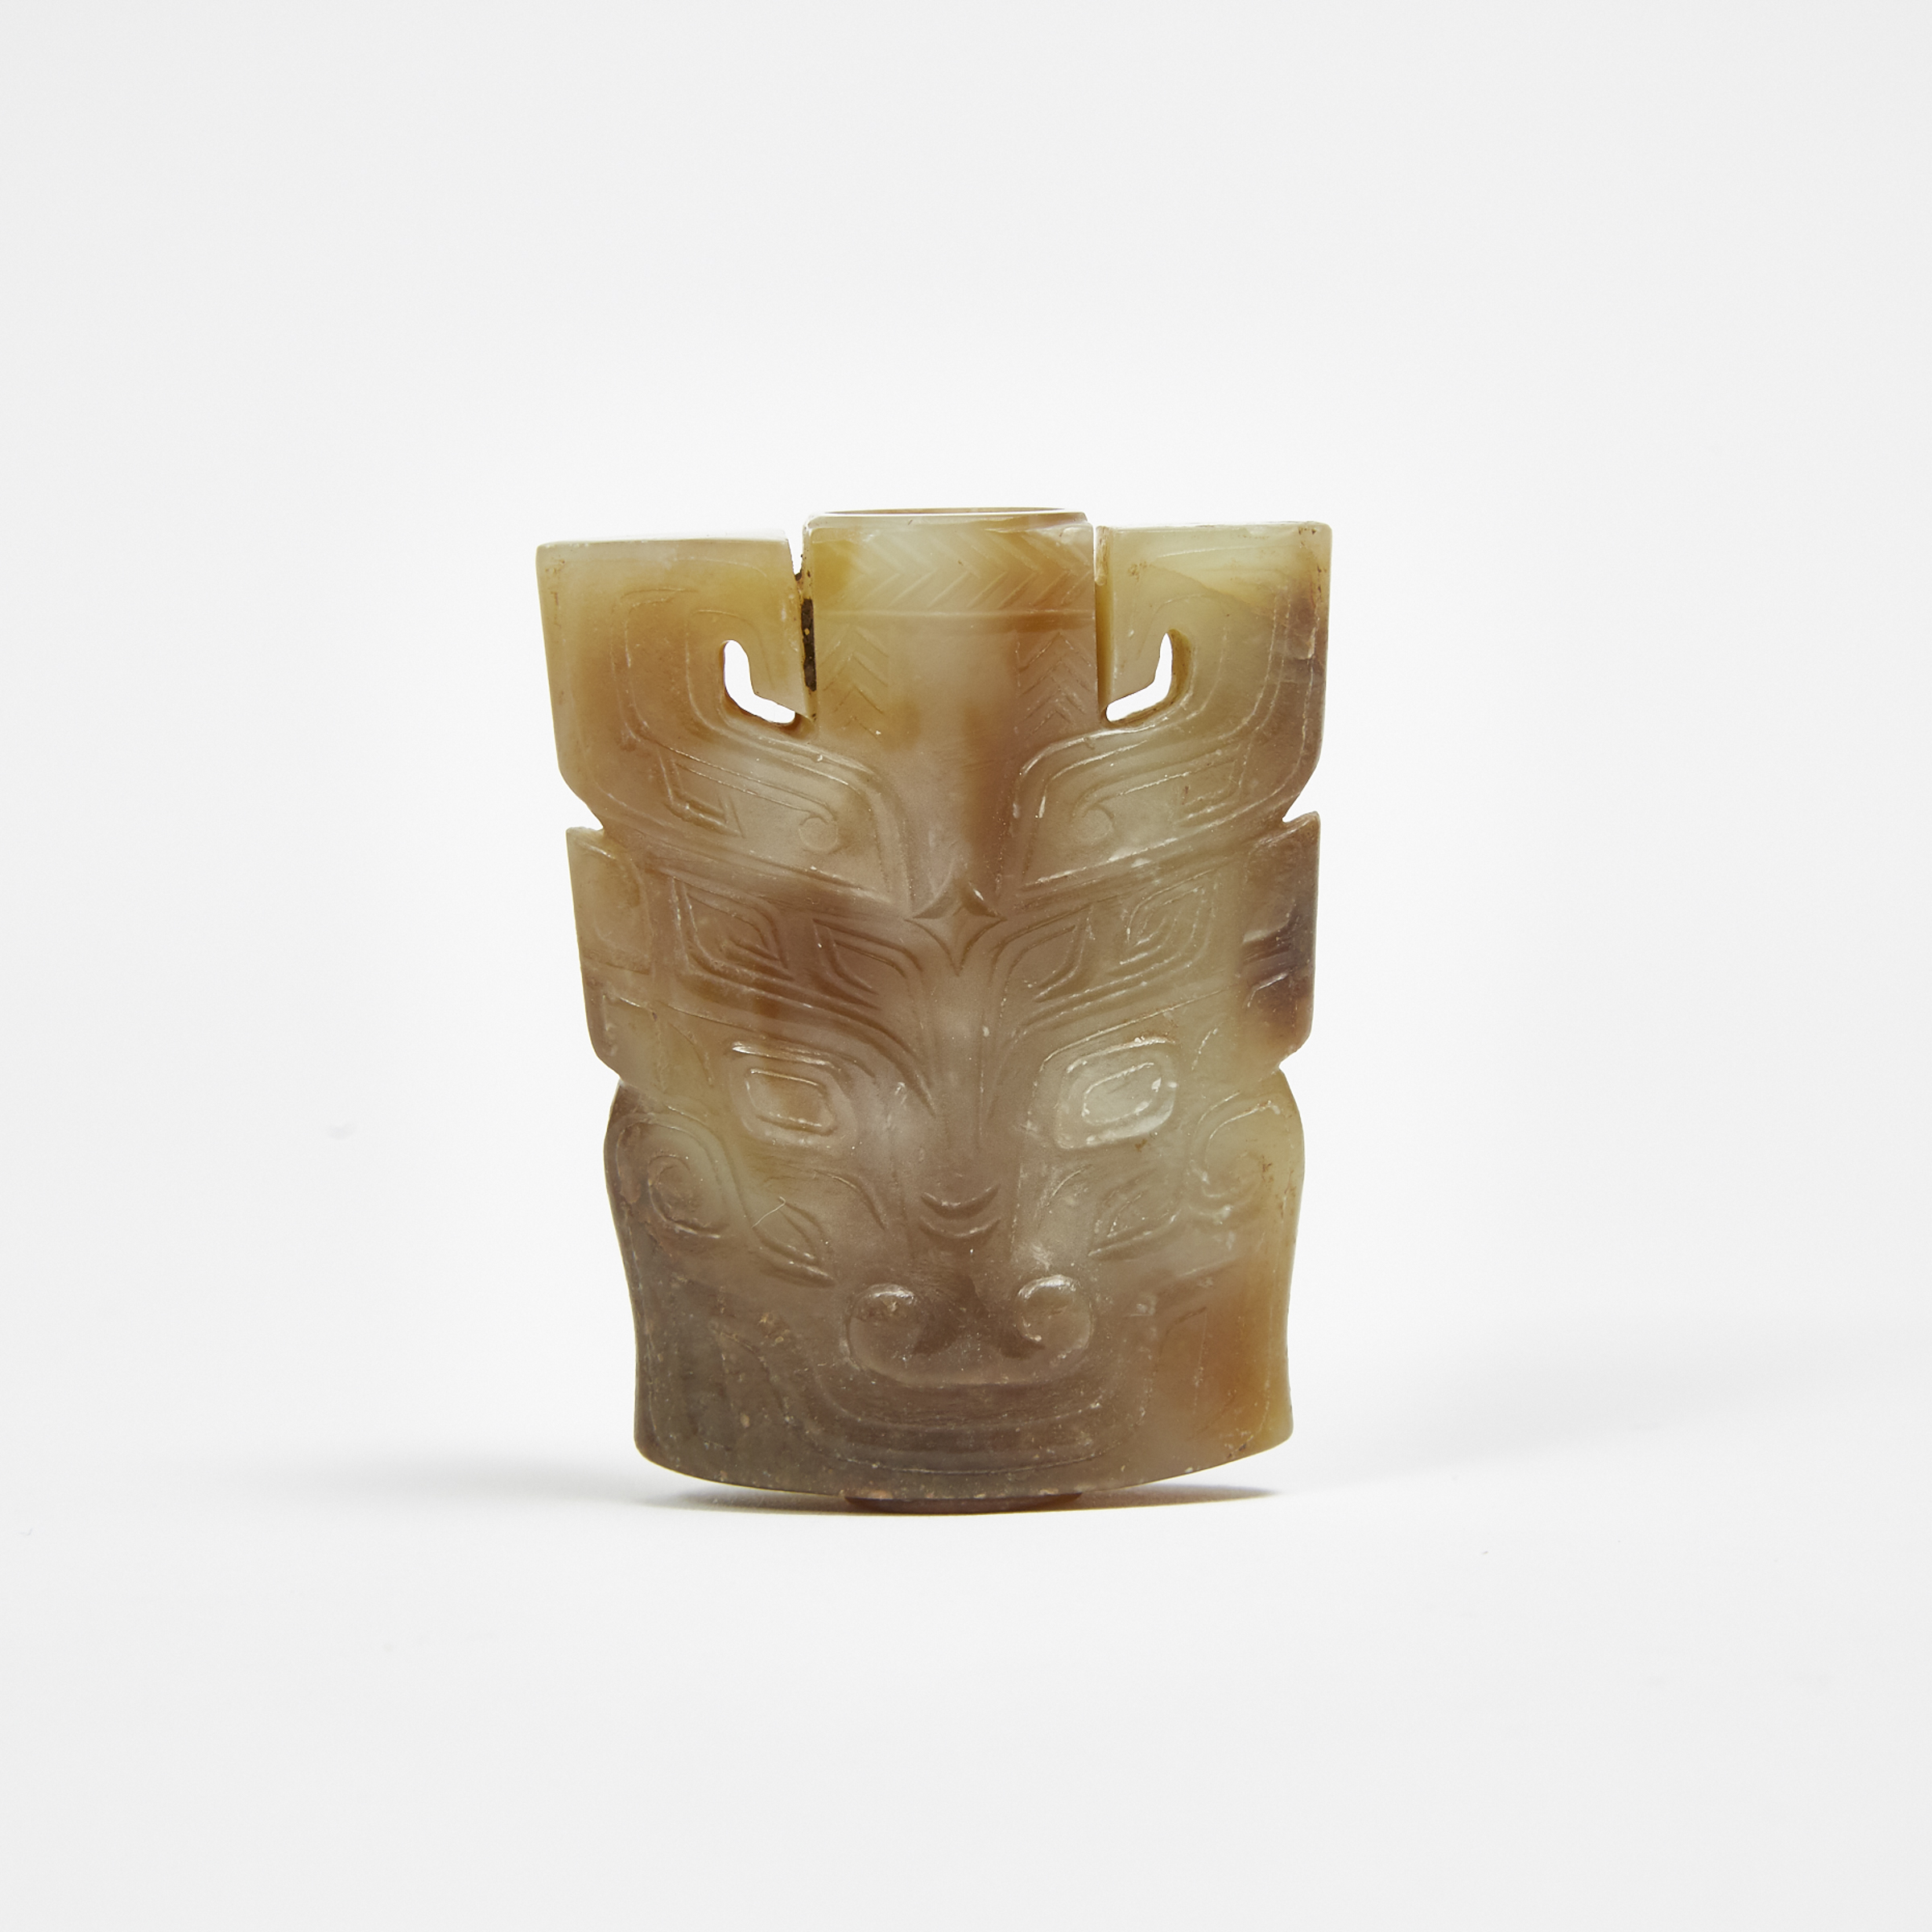 A Celadon and Russet Jade Archaic-Style Sword Pommel With Taotie Patterns